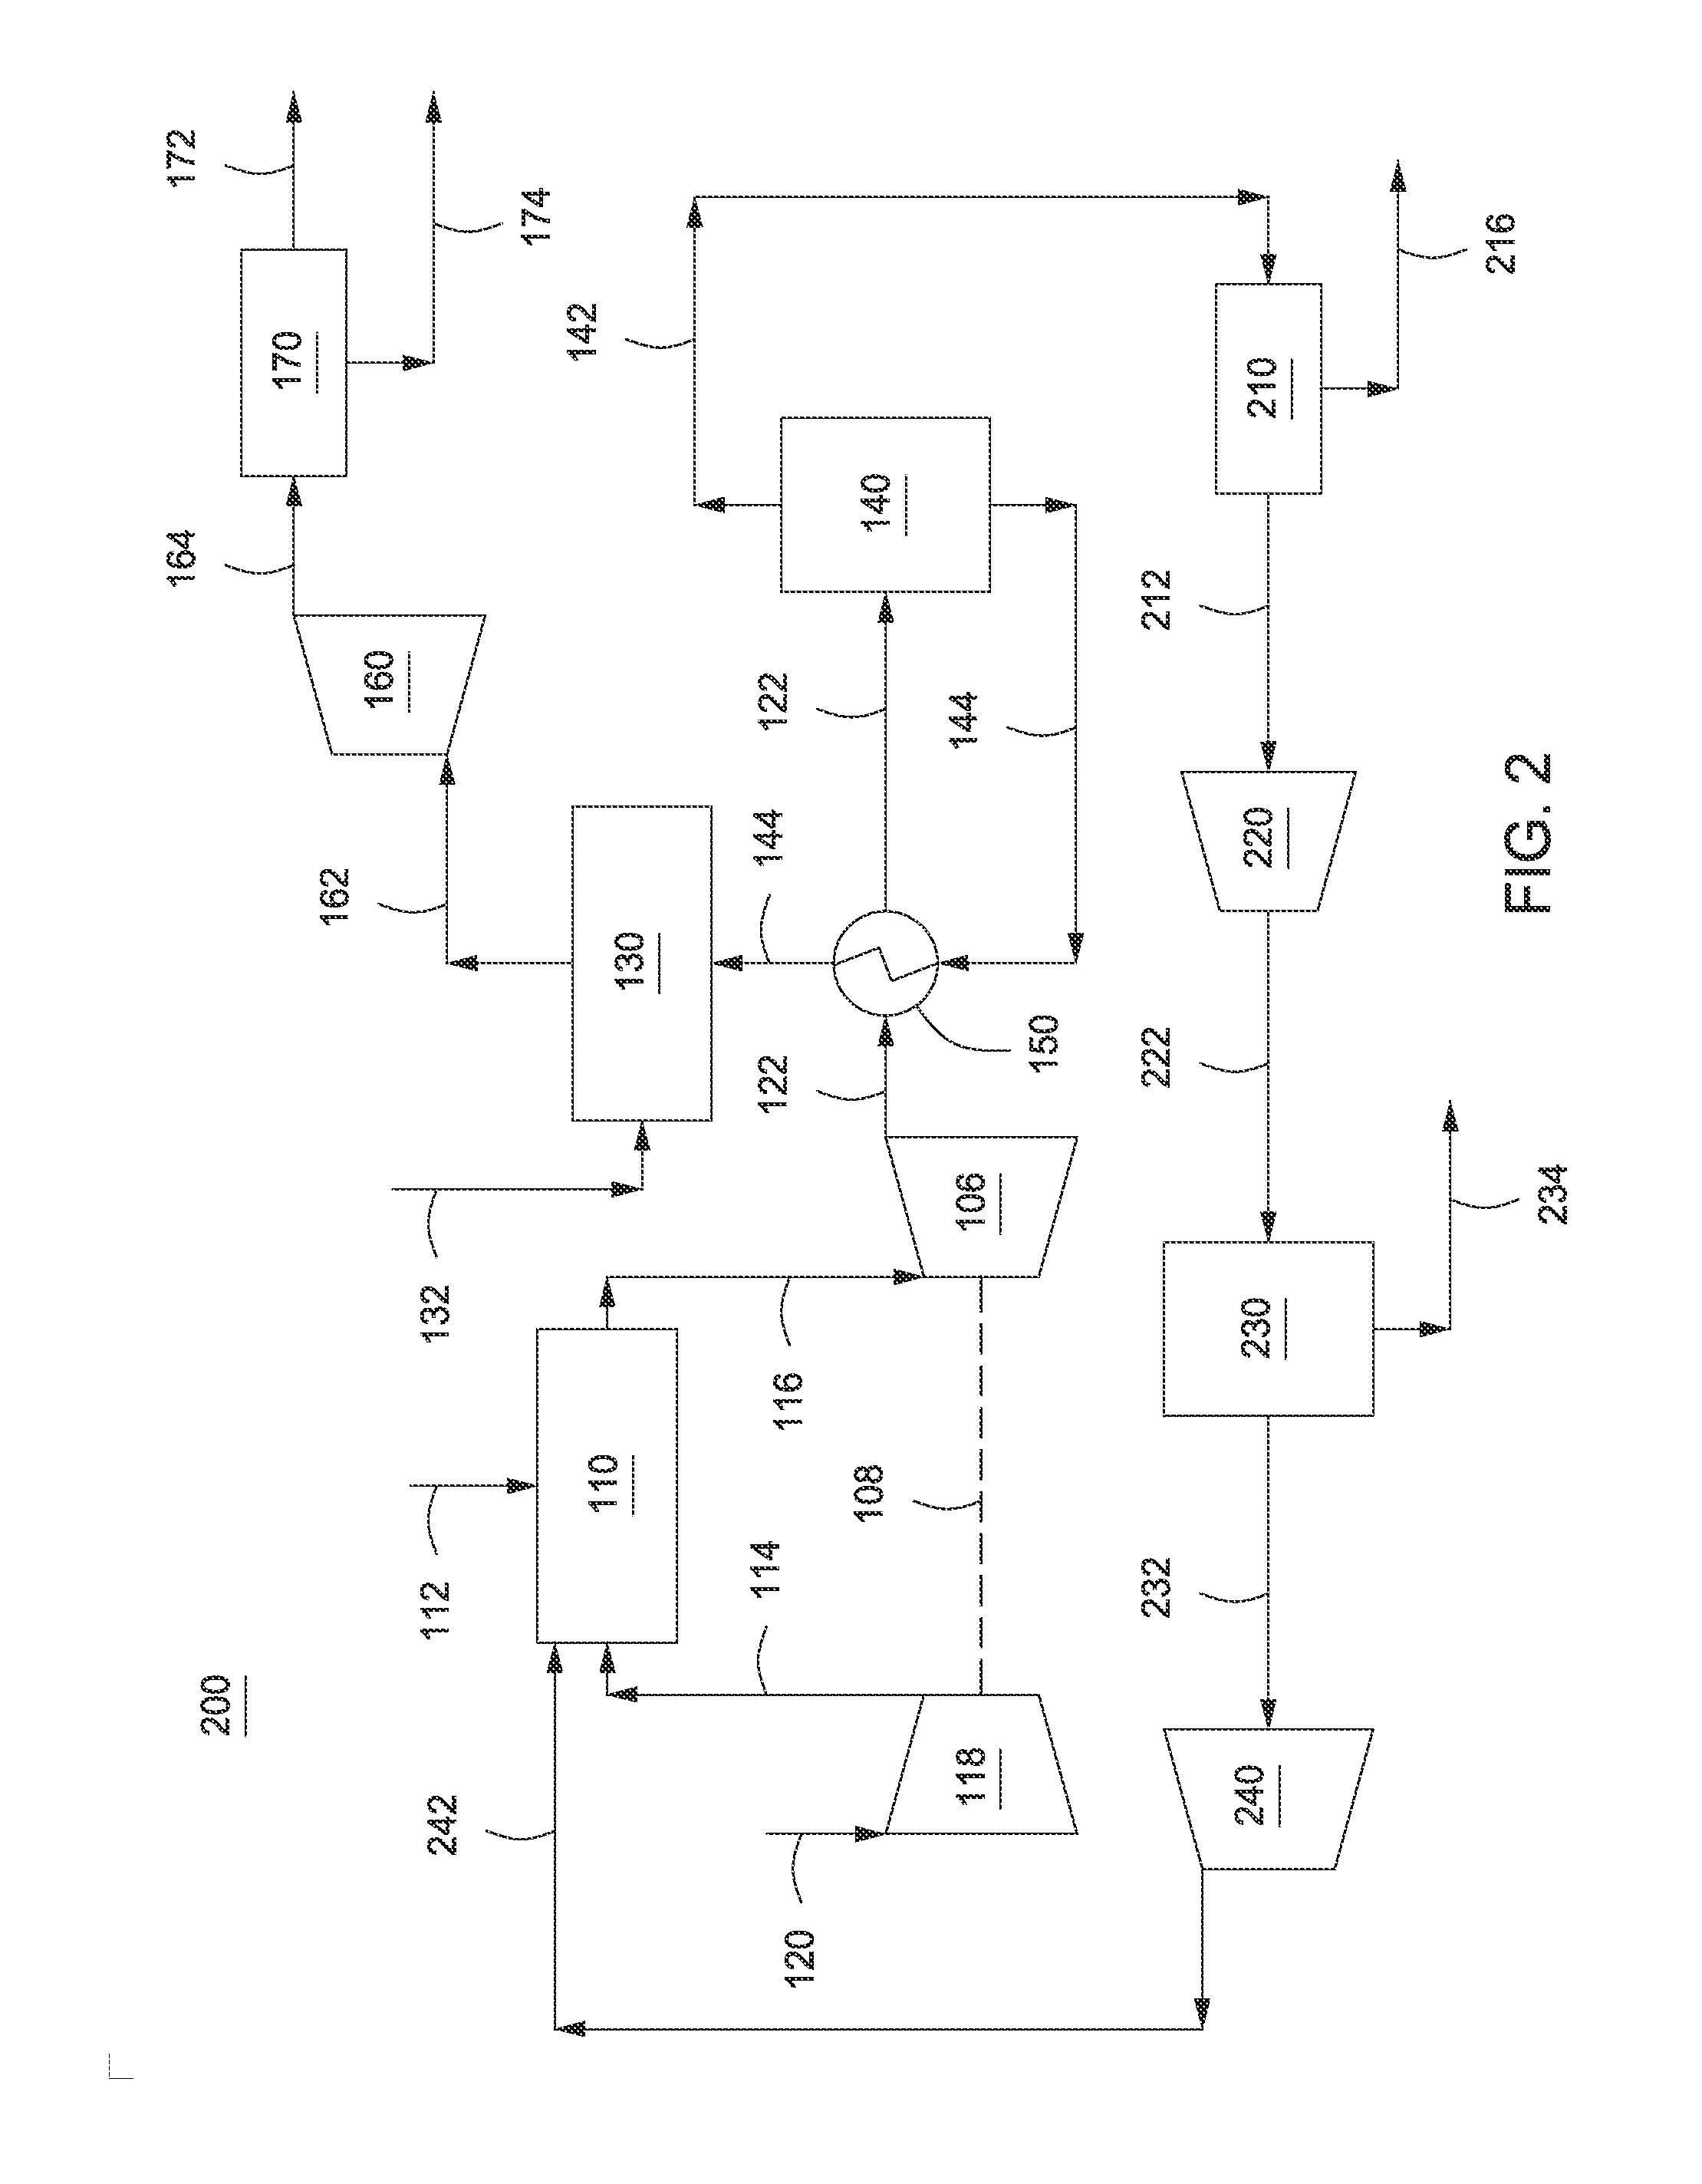 Systems and Methods For Carbon Dioxide Captrue and Power Generation In Low Emission Turbine Systems